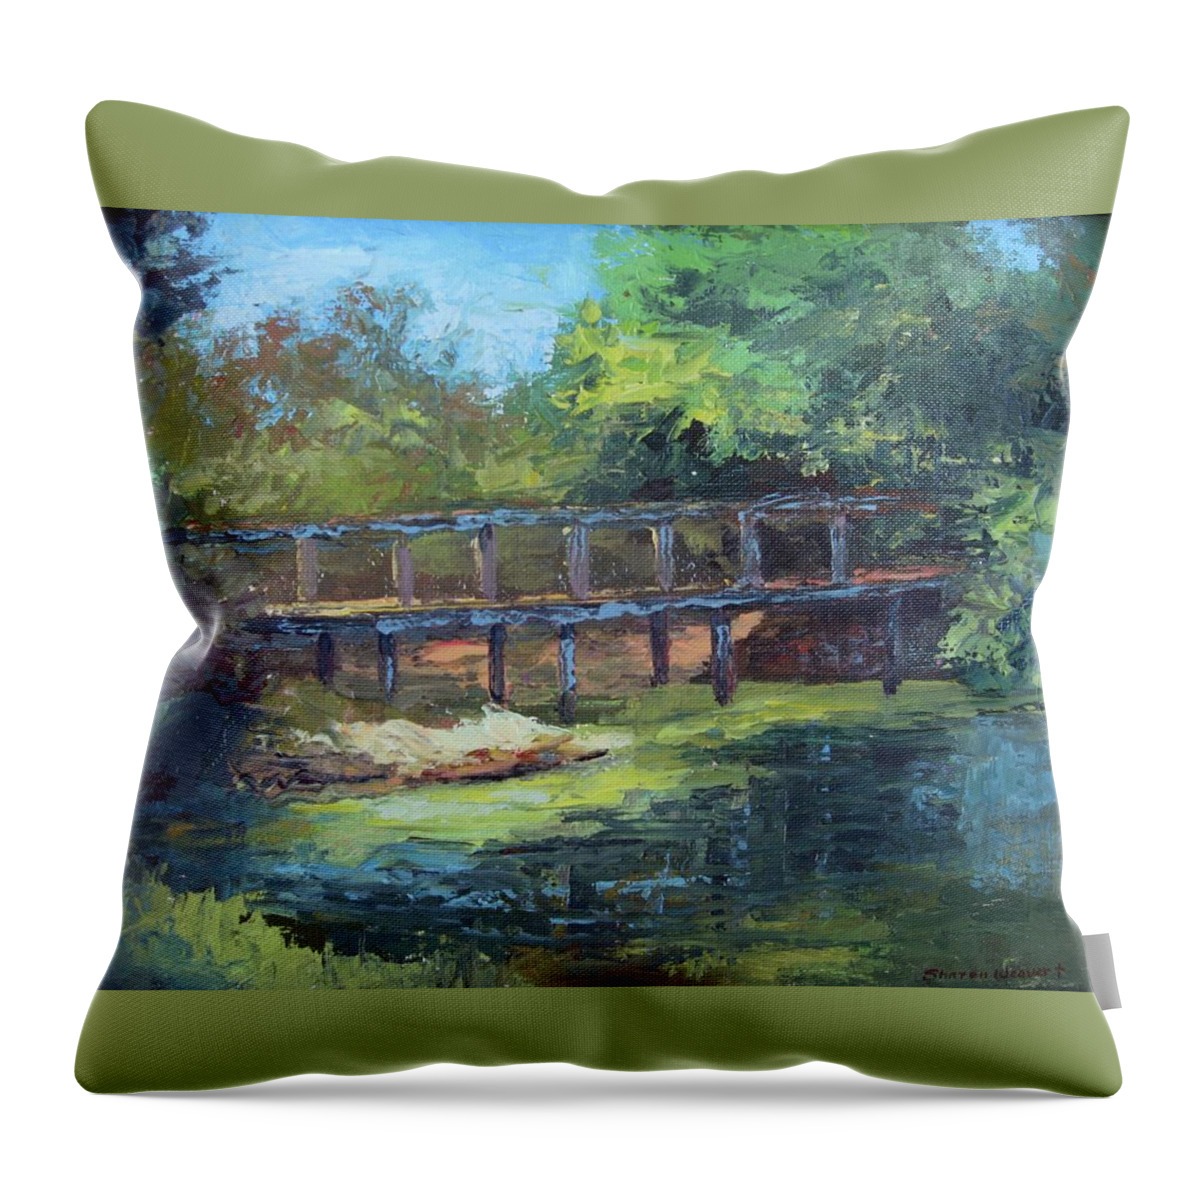 Bridge Throw Pillow featuring the painting Clearfork Bridge by Sharon Weaver